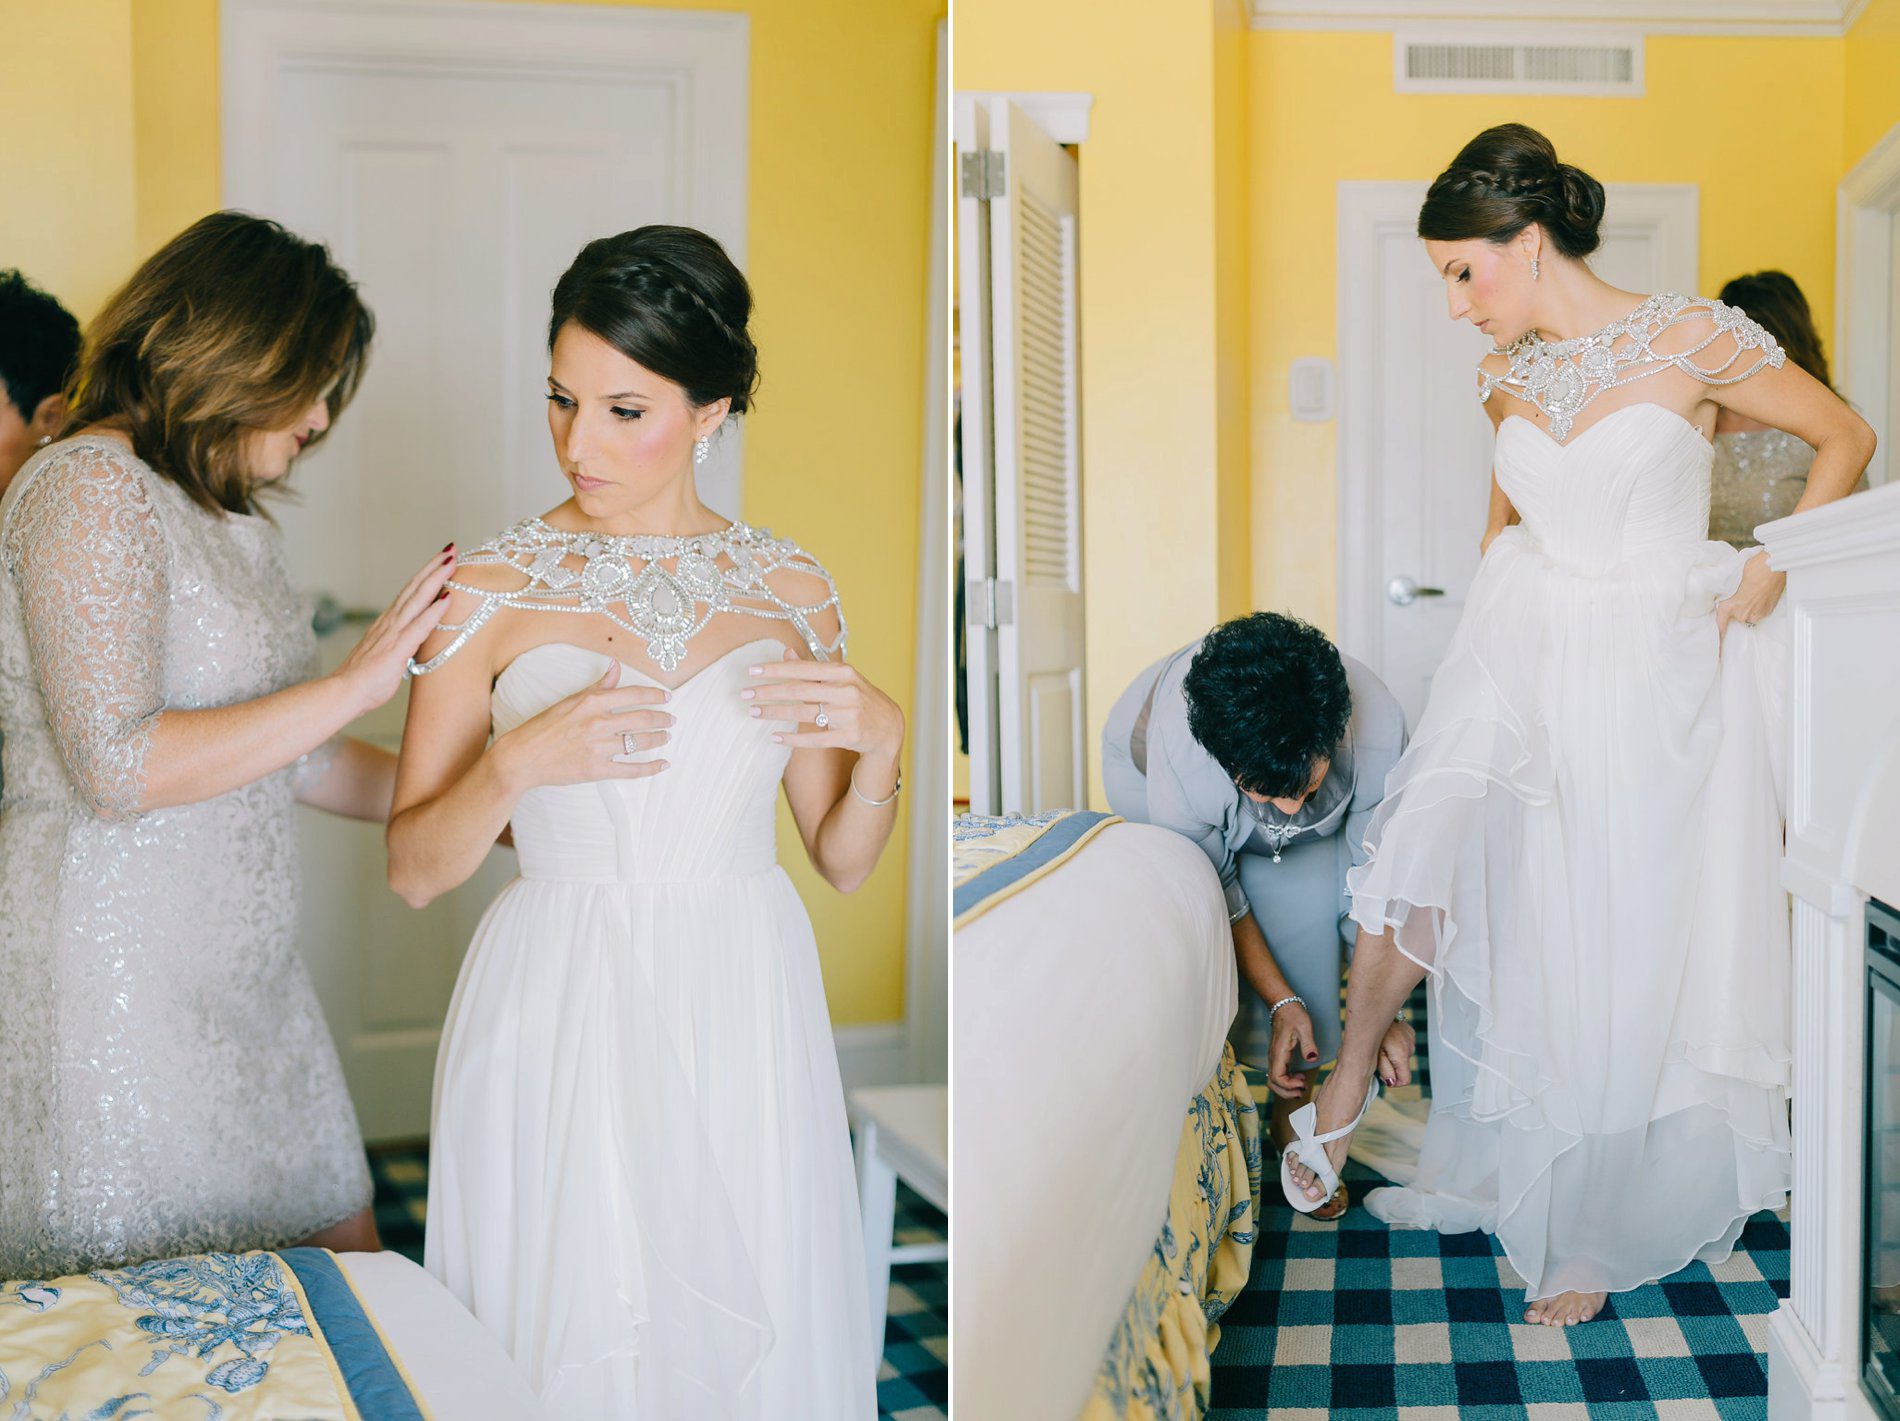 Photos of a bride getting ready with help from her mom and aunt